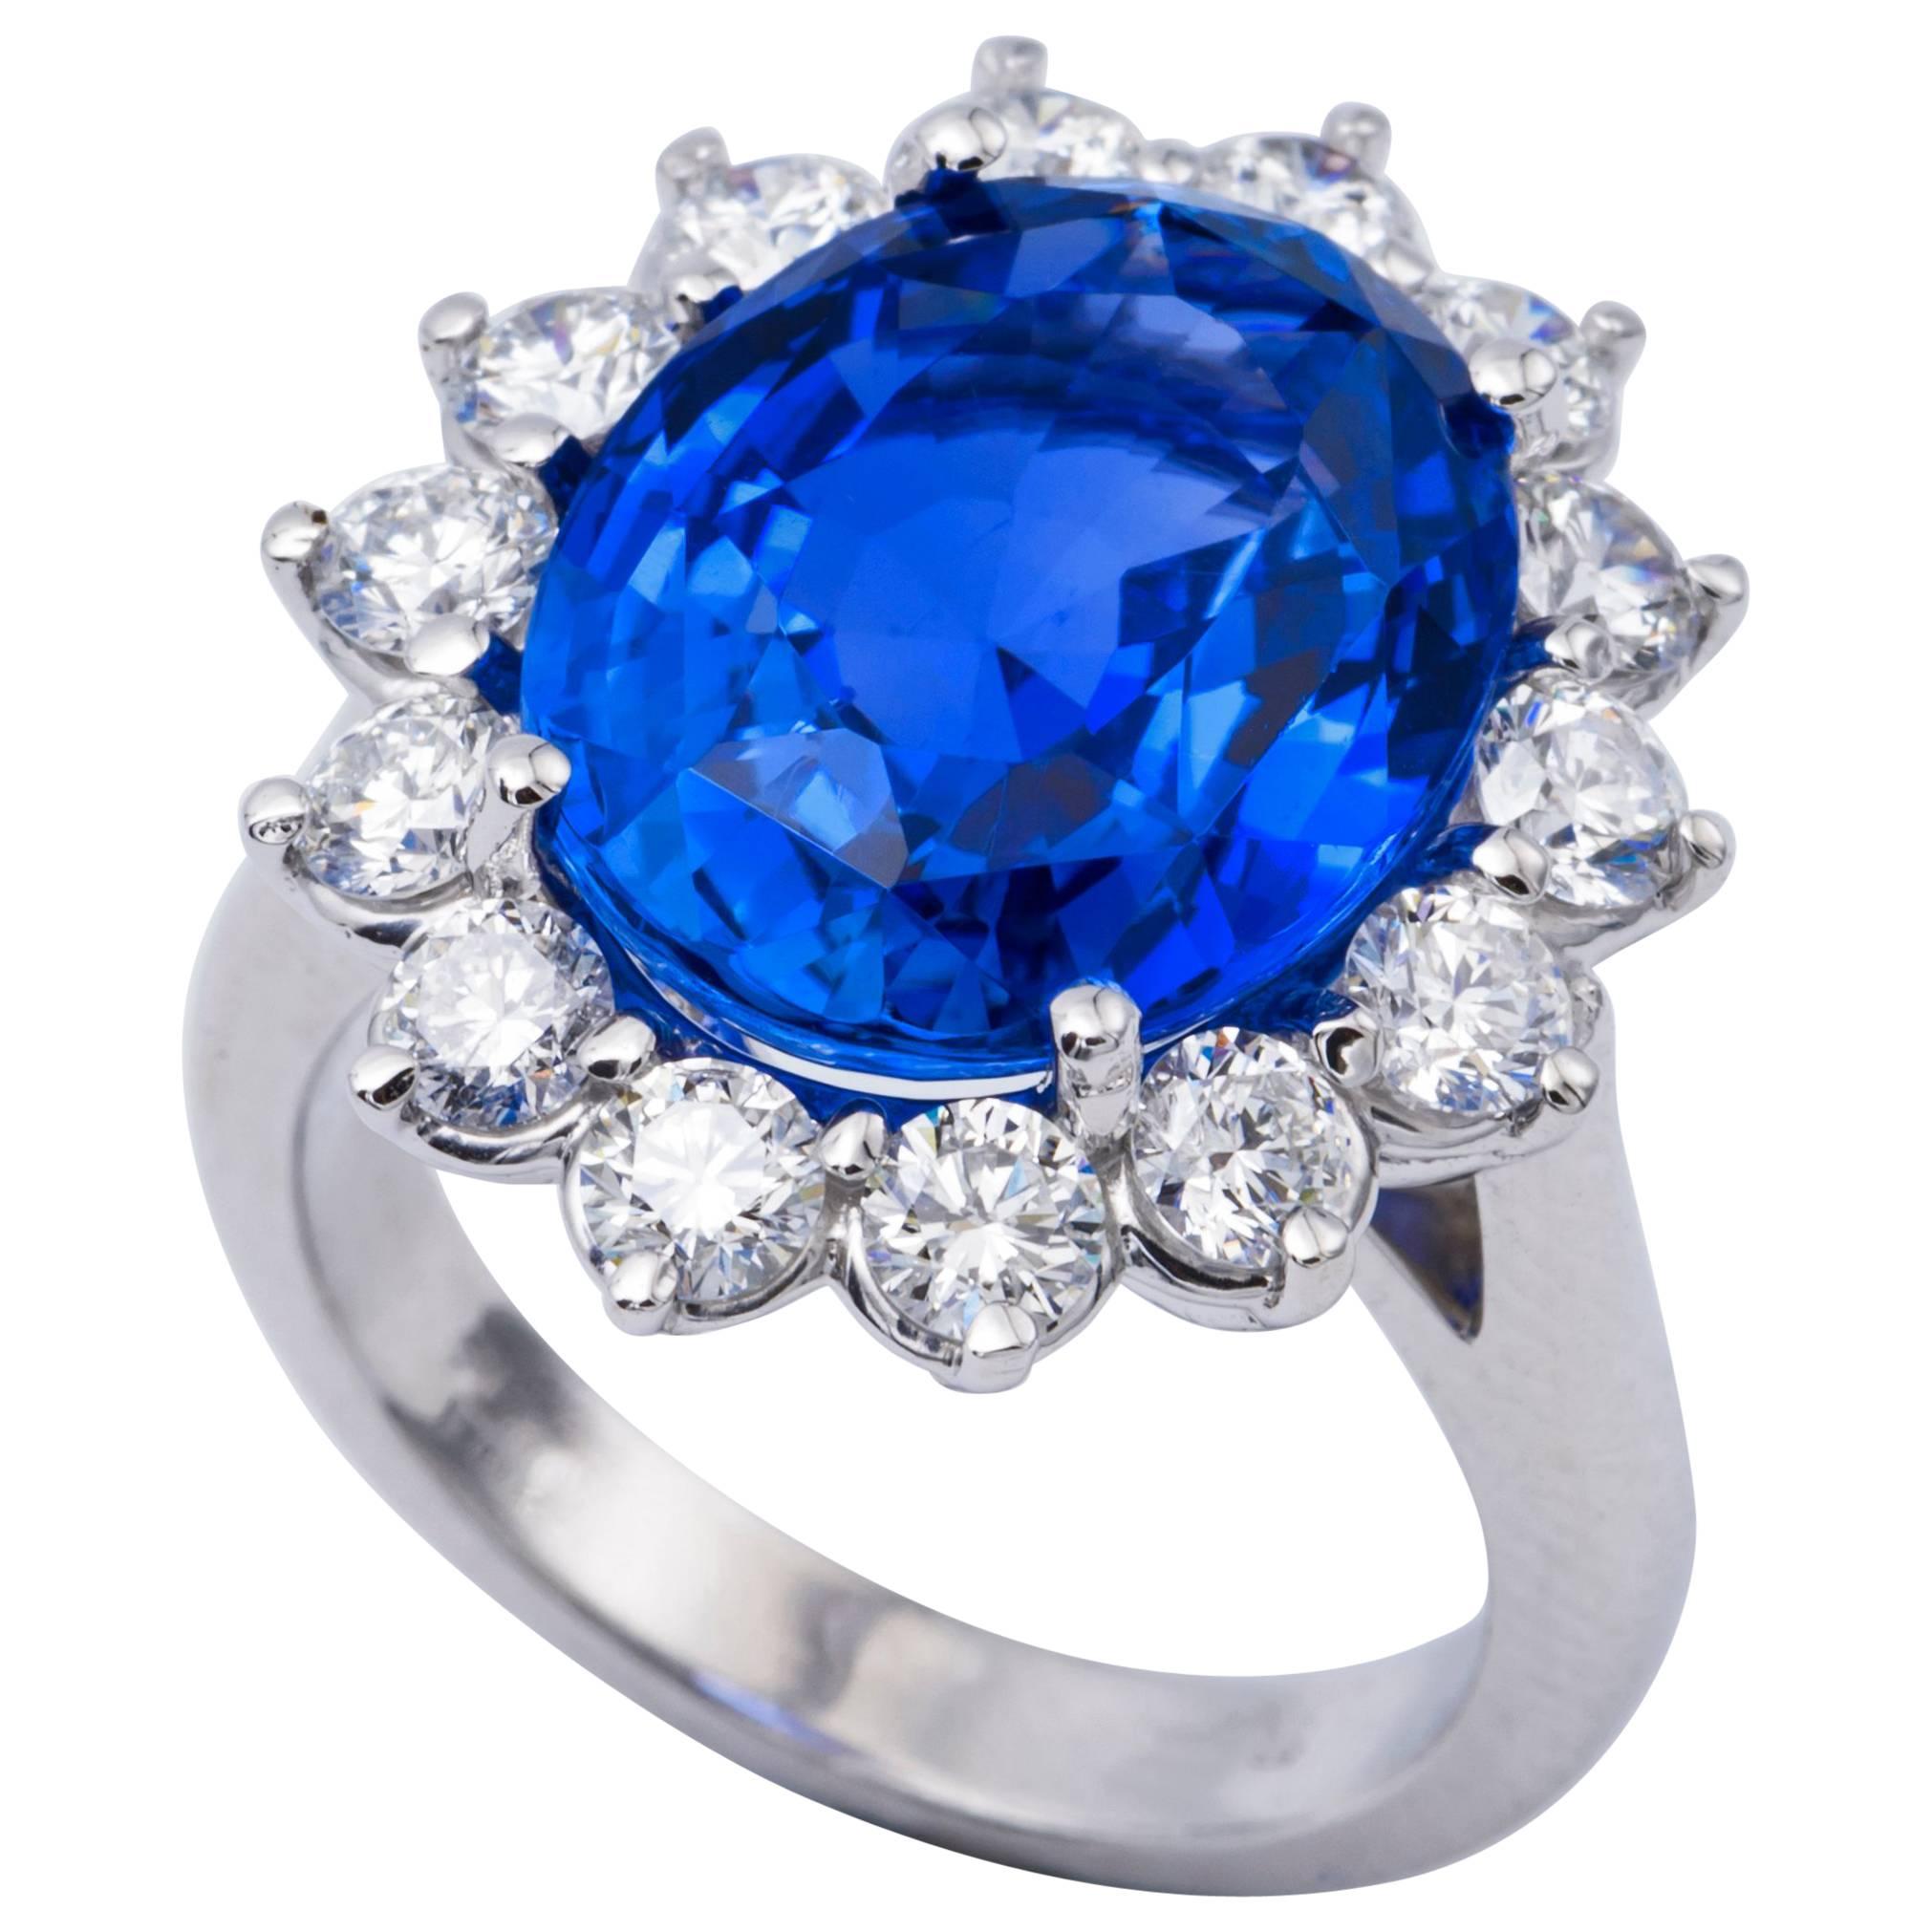 Unheated GIA Certified Sapphire Engagment Ring 12.39 Carat